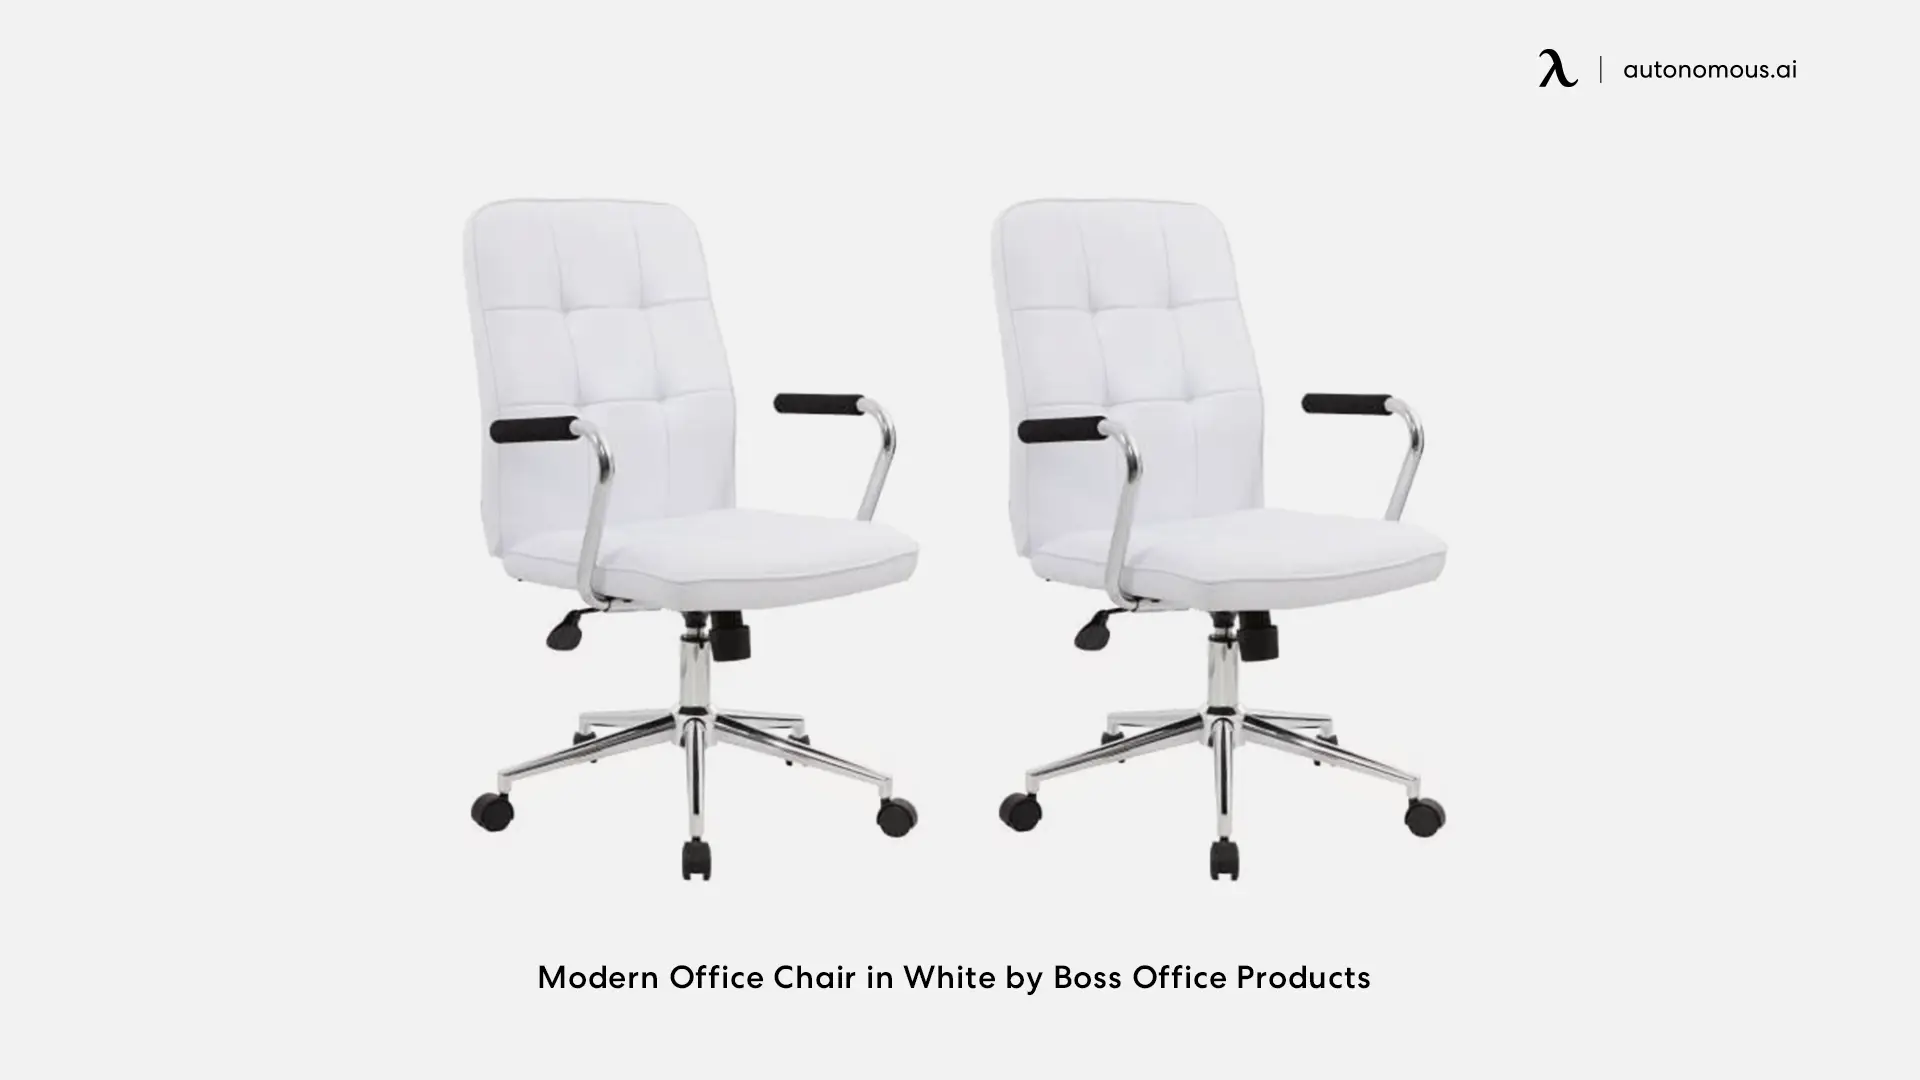 Modern Office Chair in White by Boss Office Products